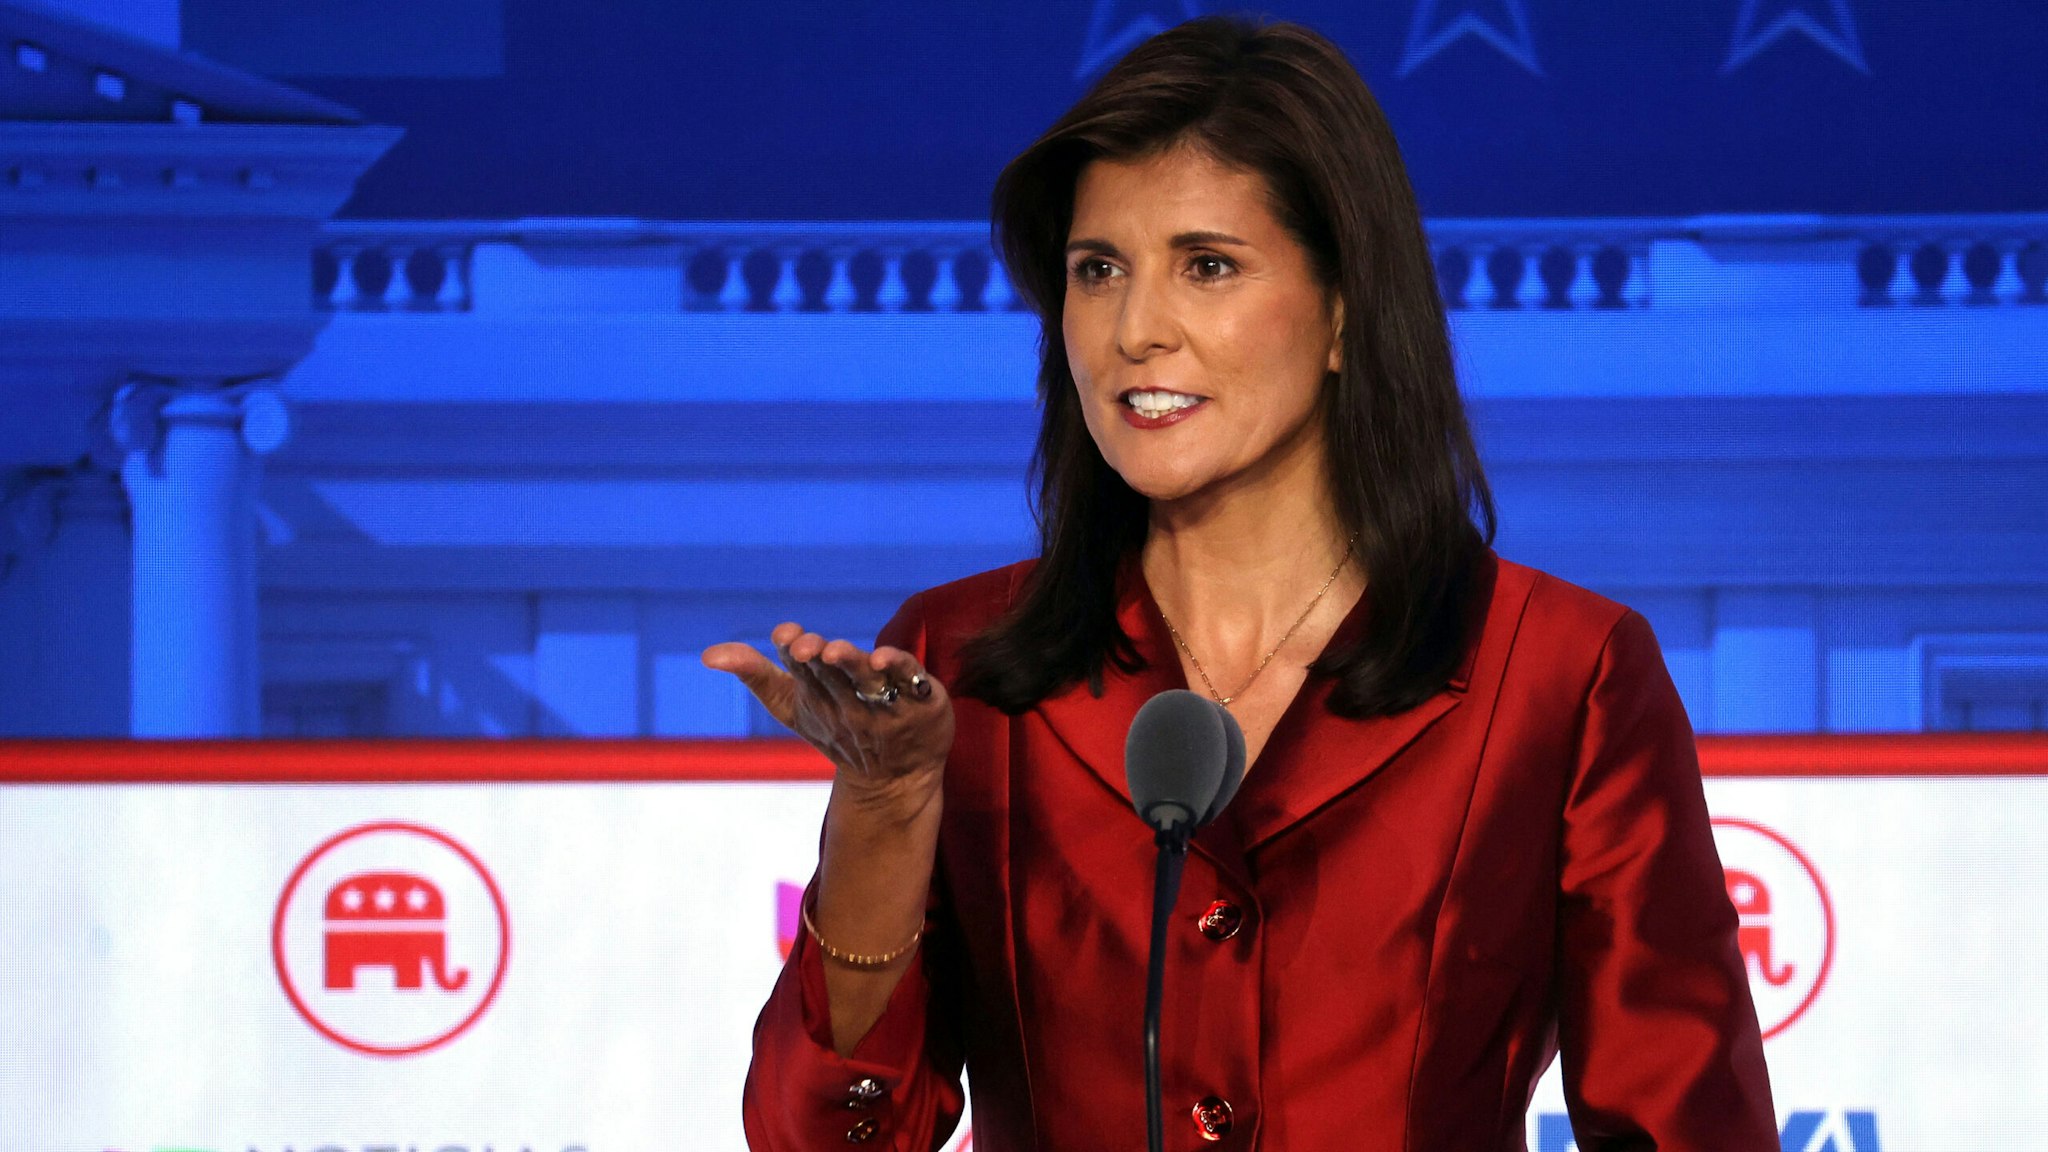 SIMI VALLEY, CALIFORNIA - SEPTEMBER 27: Republican presidential candidate former U.N. Ambassador Nikki Haley delivers remarks during the FOX Business Republican Primary Debate at the Ronald Reagan Presidential Library on September 27, 2023 in Simi Valley, California. Seven presidential hopefuls squared off in the second Republican primary debate as former U.S. President Donald Trump, currently facing indictments in four locations, declined again to participate.